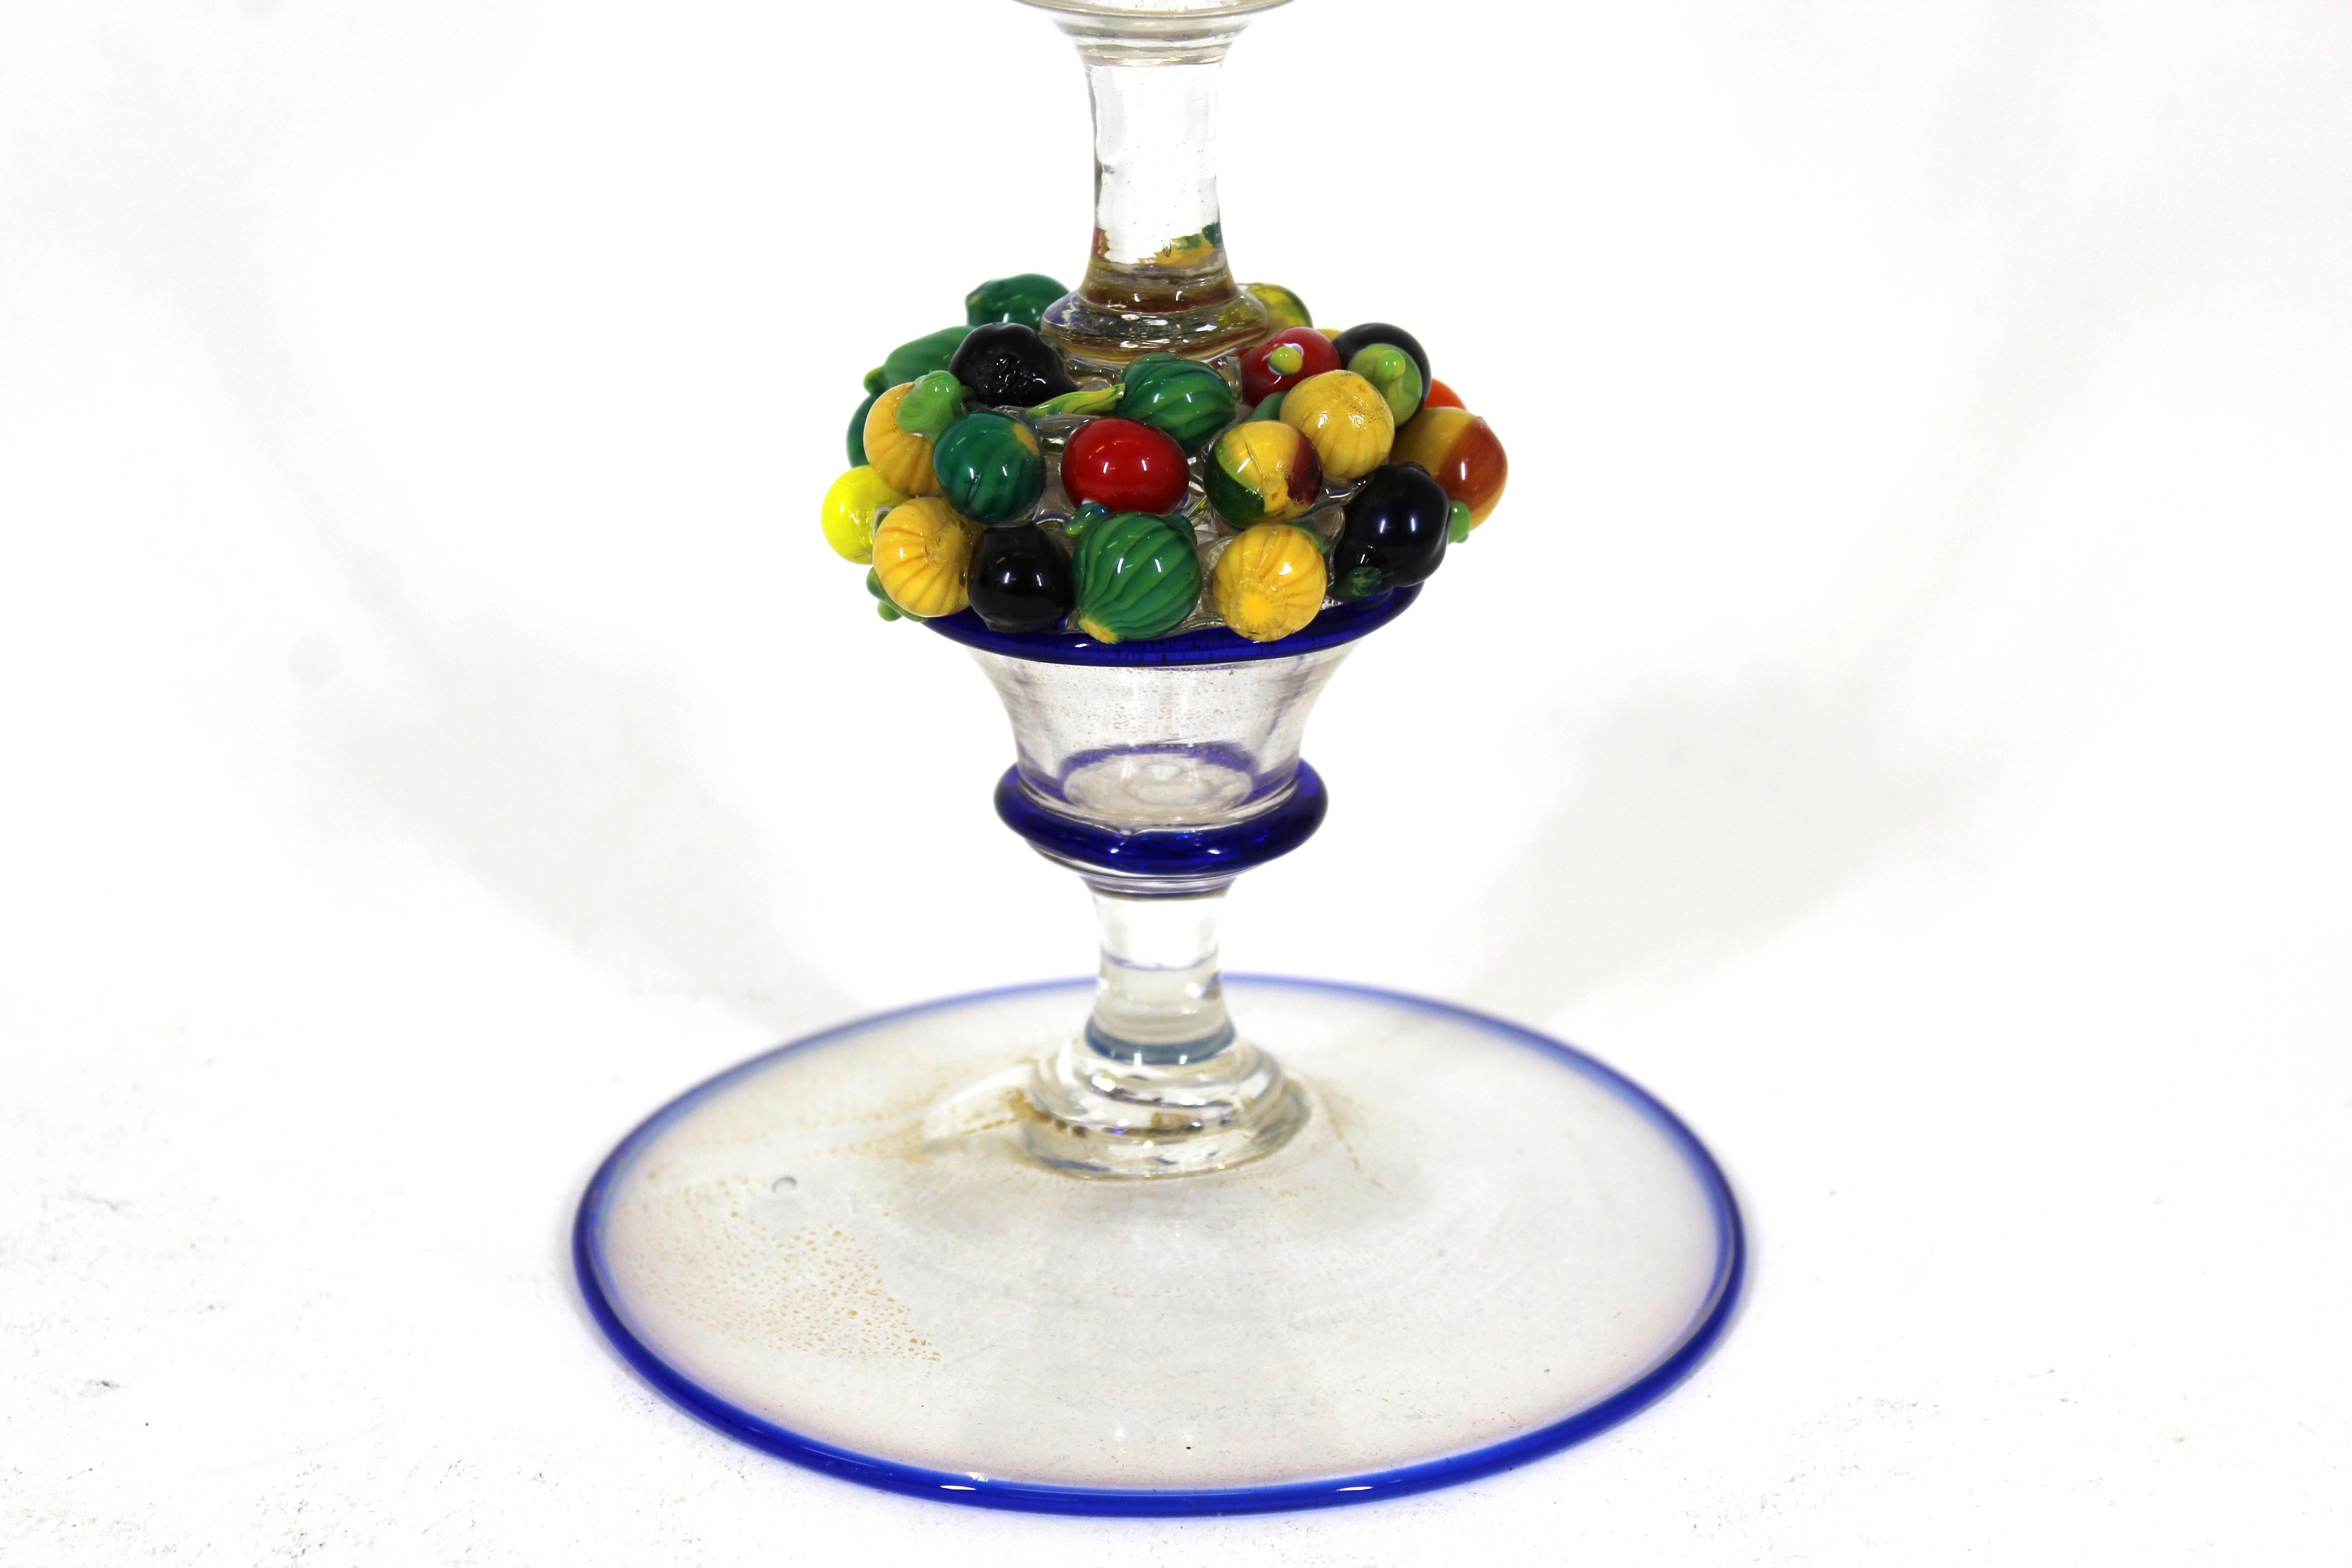 Napoleone Martinuzzi Italian Art Deco period Murano art glass goblet in clear glass with gold powder inclusions and cobalt blue trim and sculpted glass fruit basket stem. Made during the 1920's-1930's in Italy. In great antique condition with